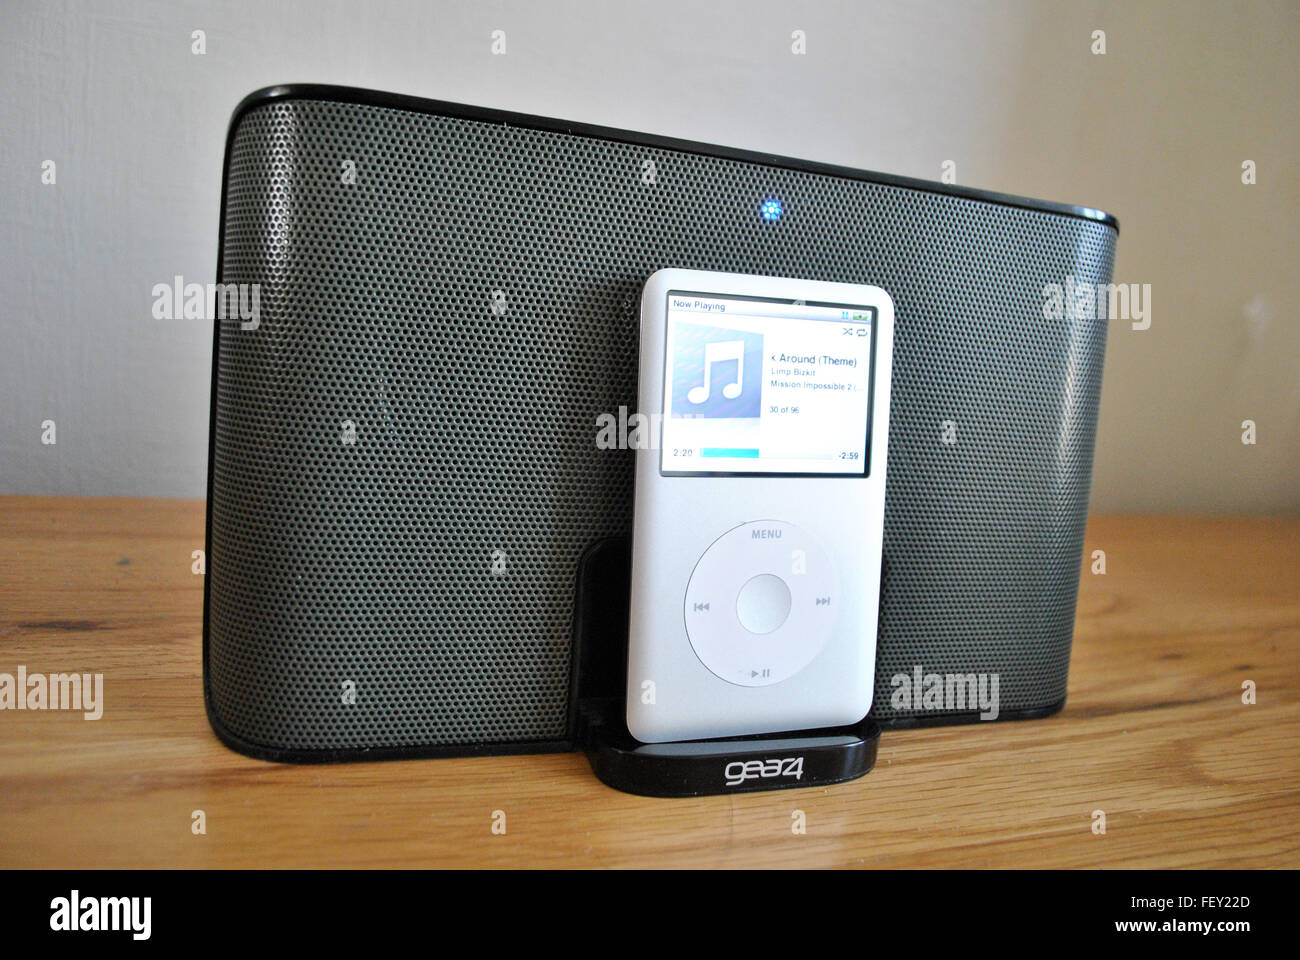 silver Apple ipod classic in a docking station Stock Photo - Alamy